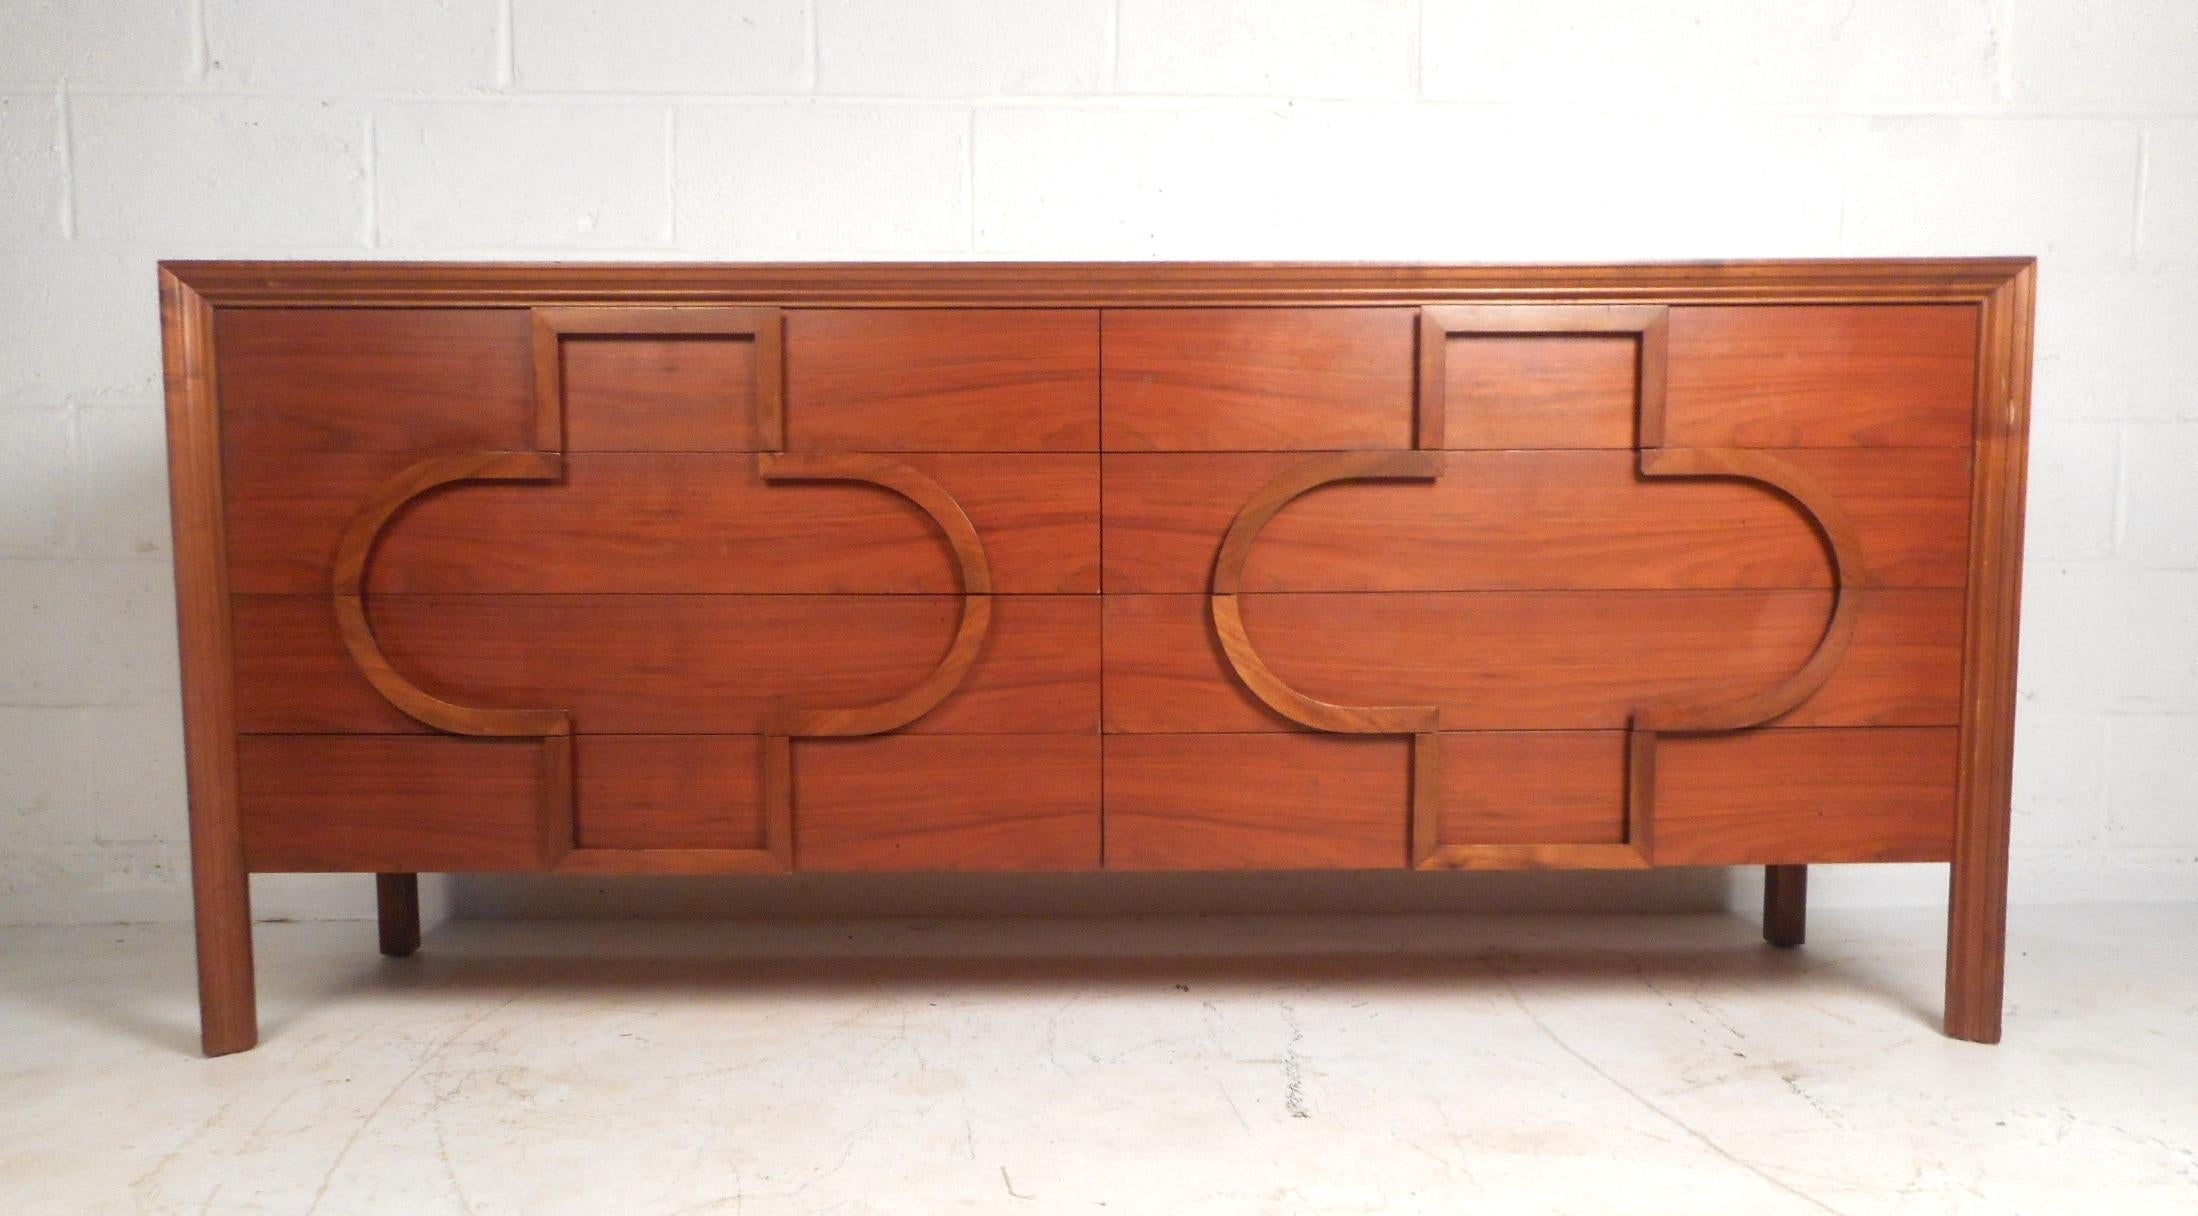 This wonderful vintage dresser has a unique embossed design that is not only stylish, but also practical as the pattern doubles for drawer pulls. The dresser has a brilliant walnut finish and eight spacious drawers. Designed by Edmund Spence, this